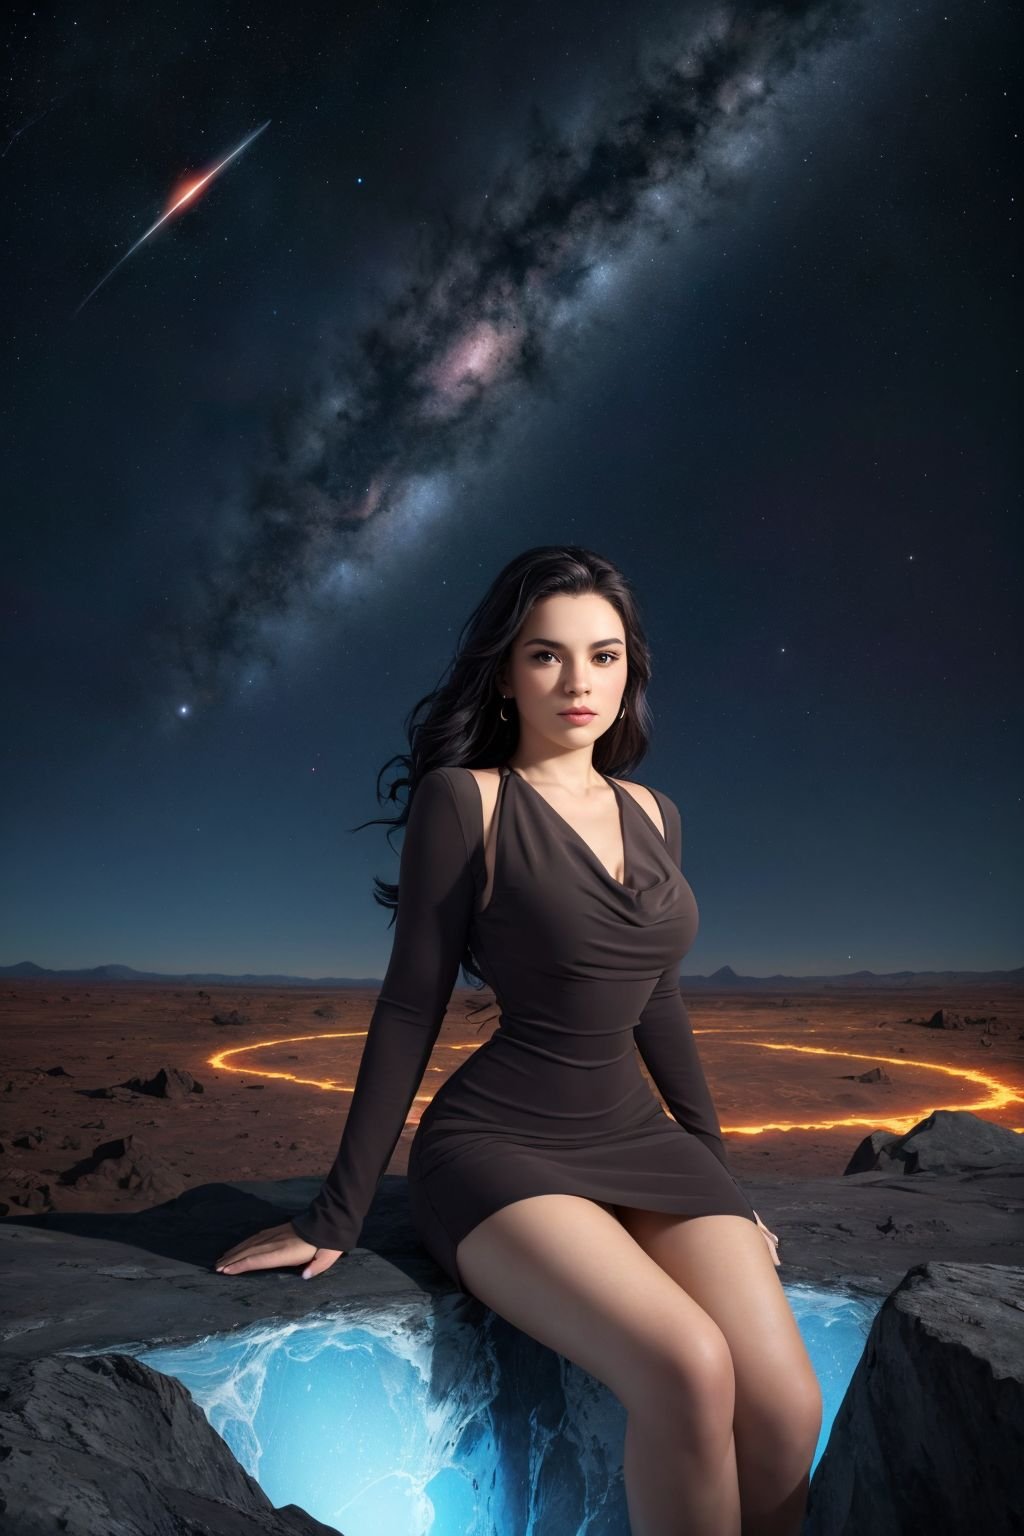 Draw a young programmer, sitting on a research platform floating in the middle of an asteroid belt. she is studying with a notebook, surrounded by several asteroids glowing with fiery auras. Dramatic lighting from distant stars and planets illuminates the scene, casting deep shadows on the suit. The young woman looks confident and determined, looking at the vast and mysterious universe with wonder and respect,facial hair, cowboy shot, rayen dress, short dress, long sleeves, cleavage, <lora:LR12_10xRayenDress49_Animerge_v1-000007:0.8>